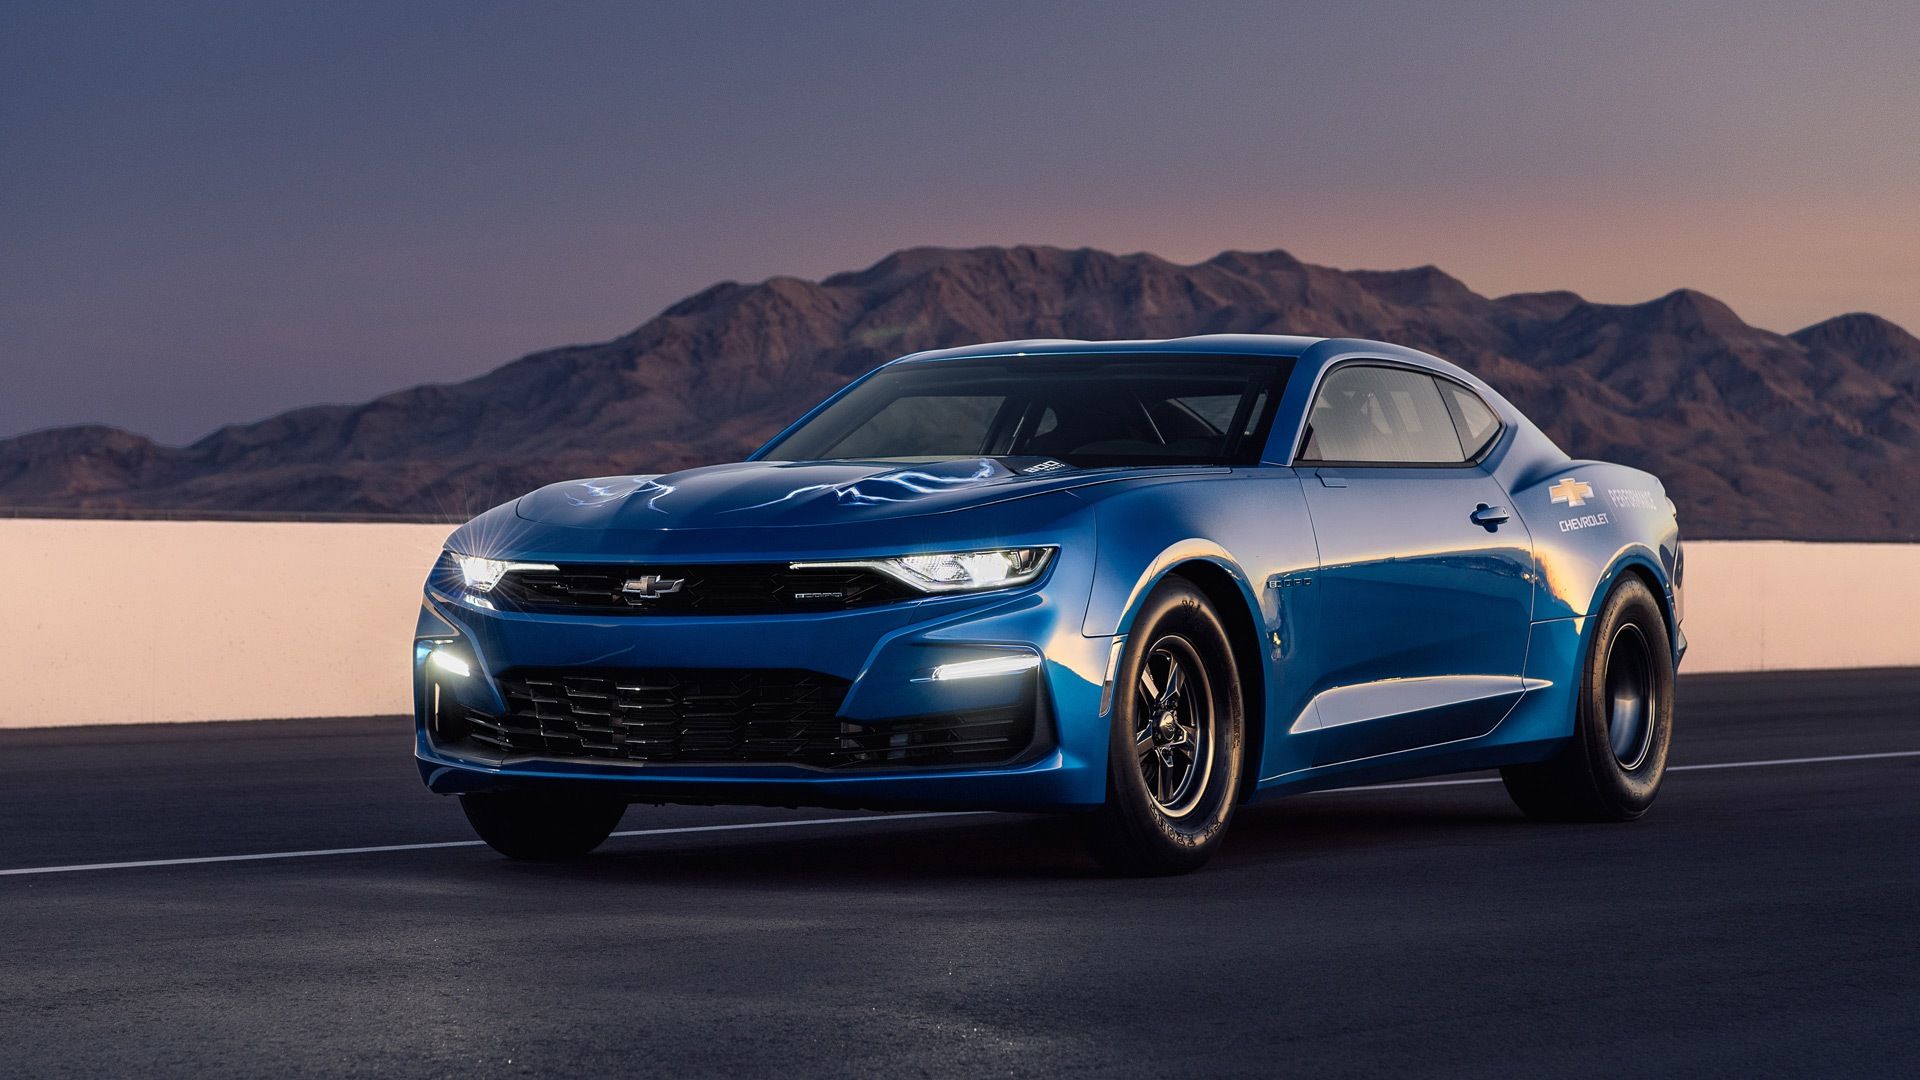 Riverside Blue Metallic 2019 Chevrolet eCOPO Camaro on the track at dusk with its headlights on